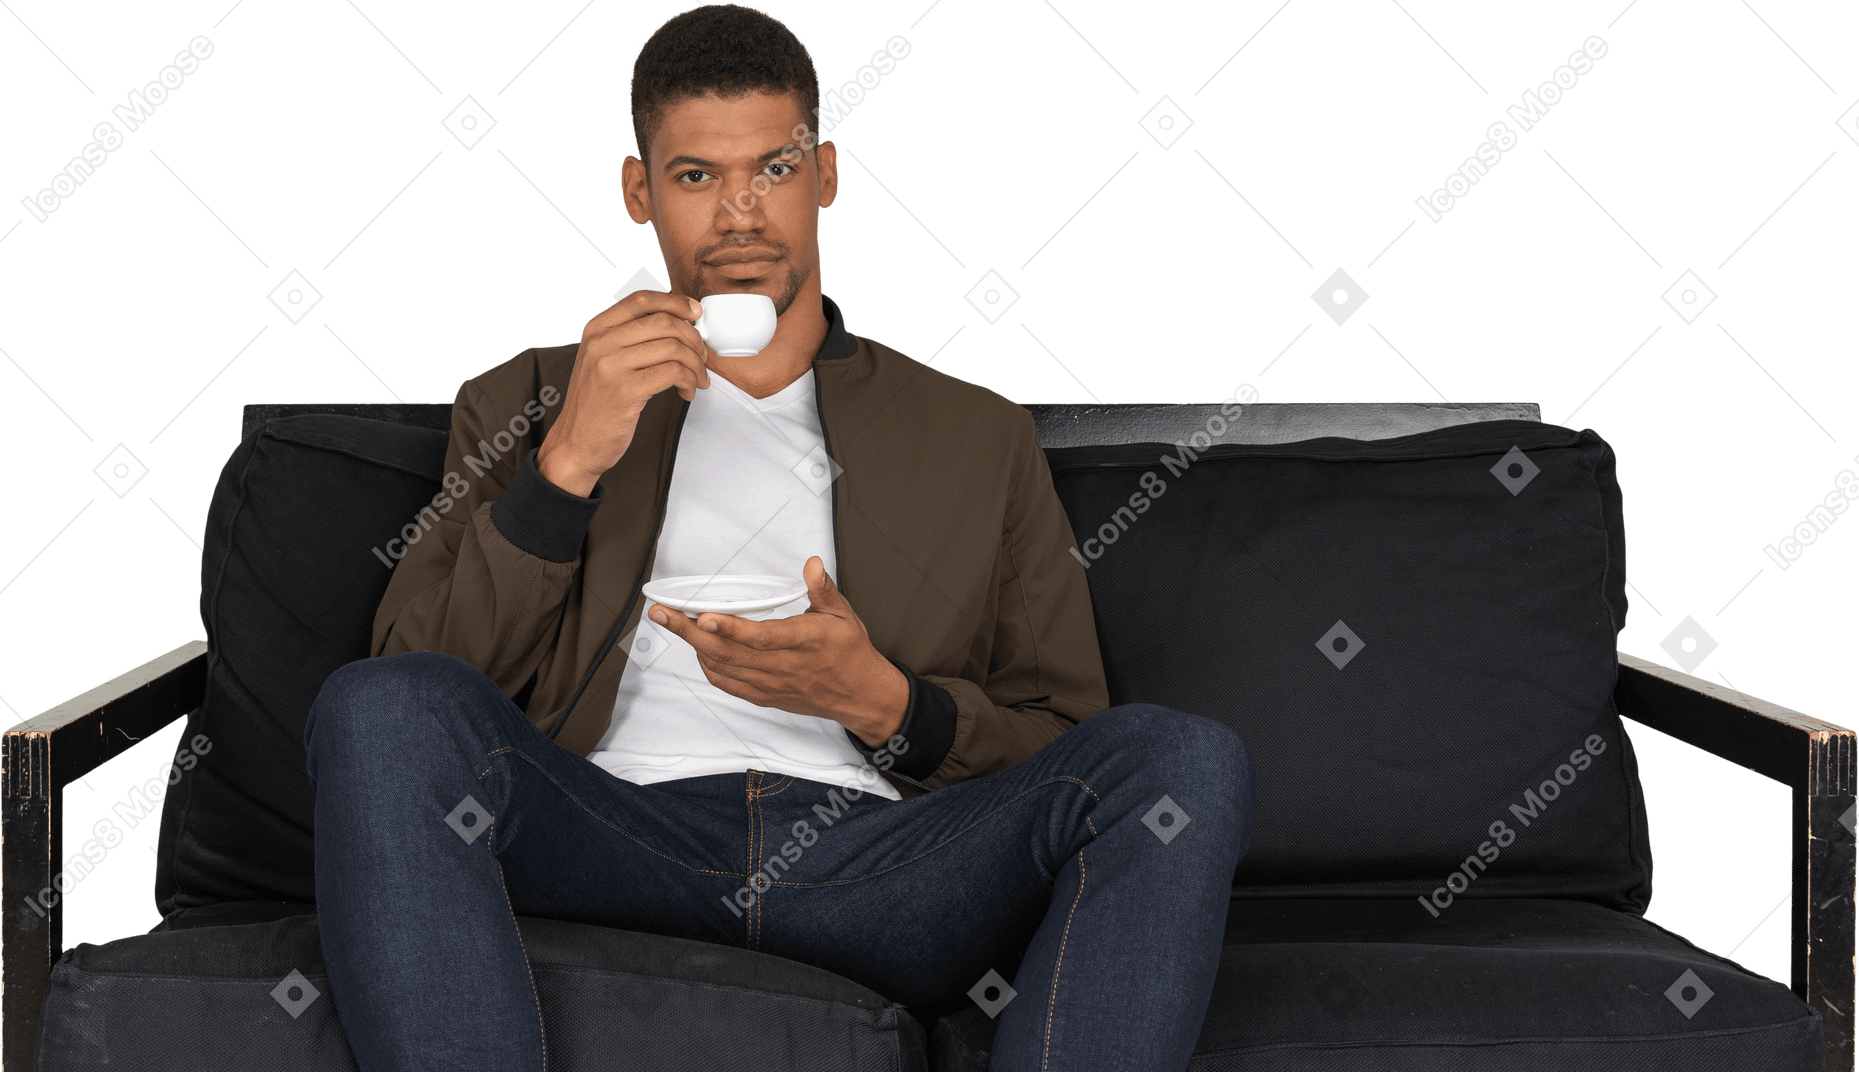 Front view of a young dreaming man sitting on a sofa while drinking coffee